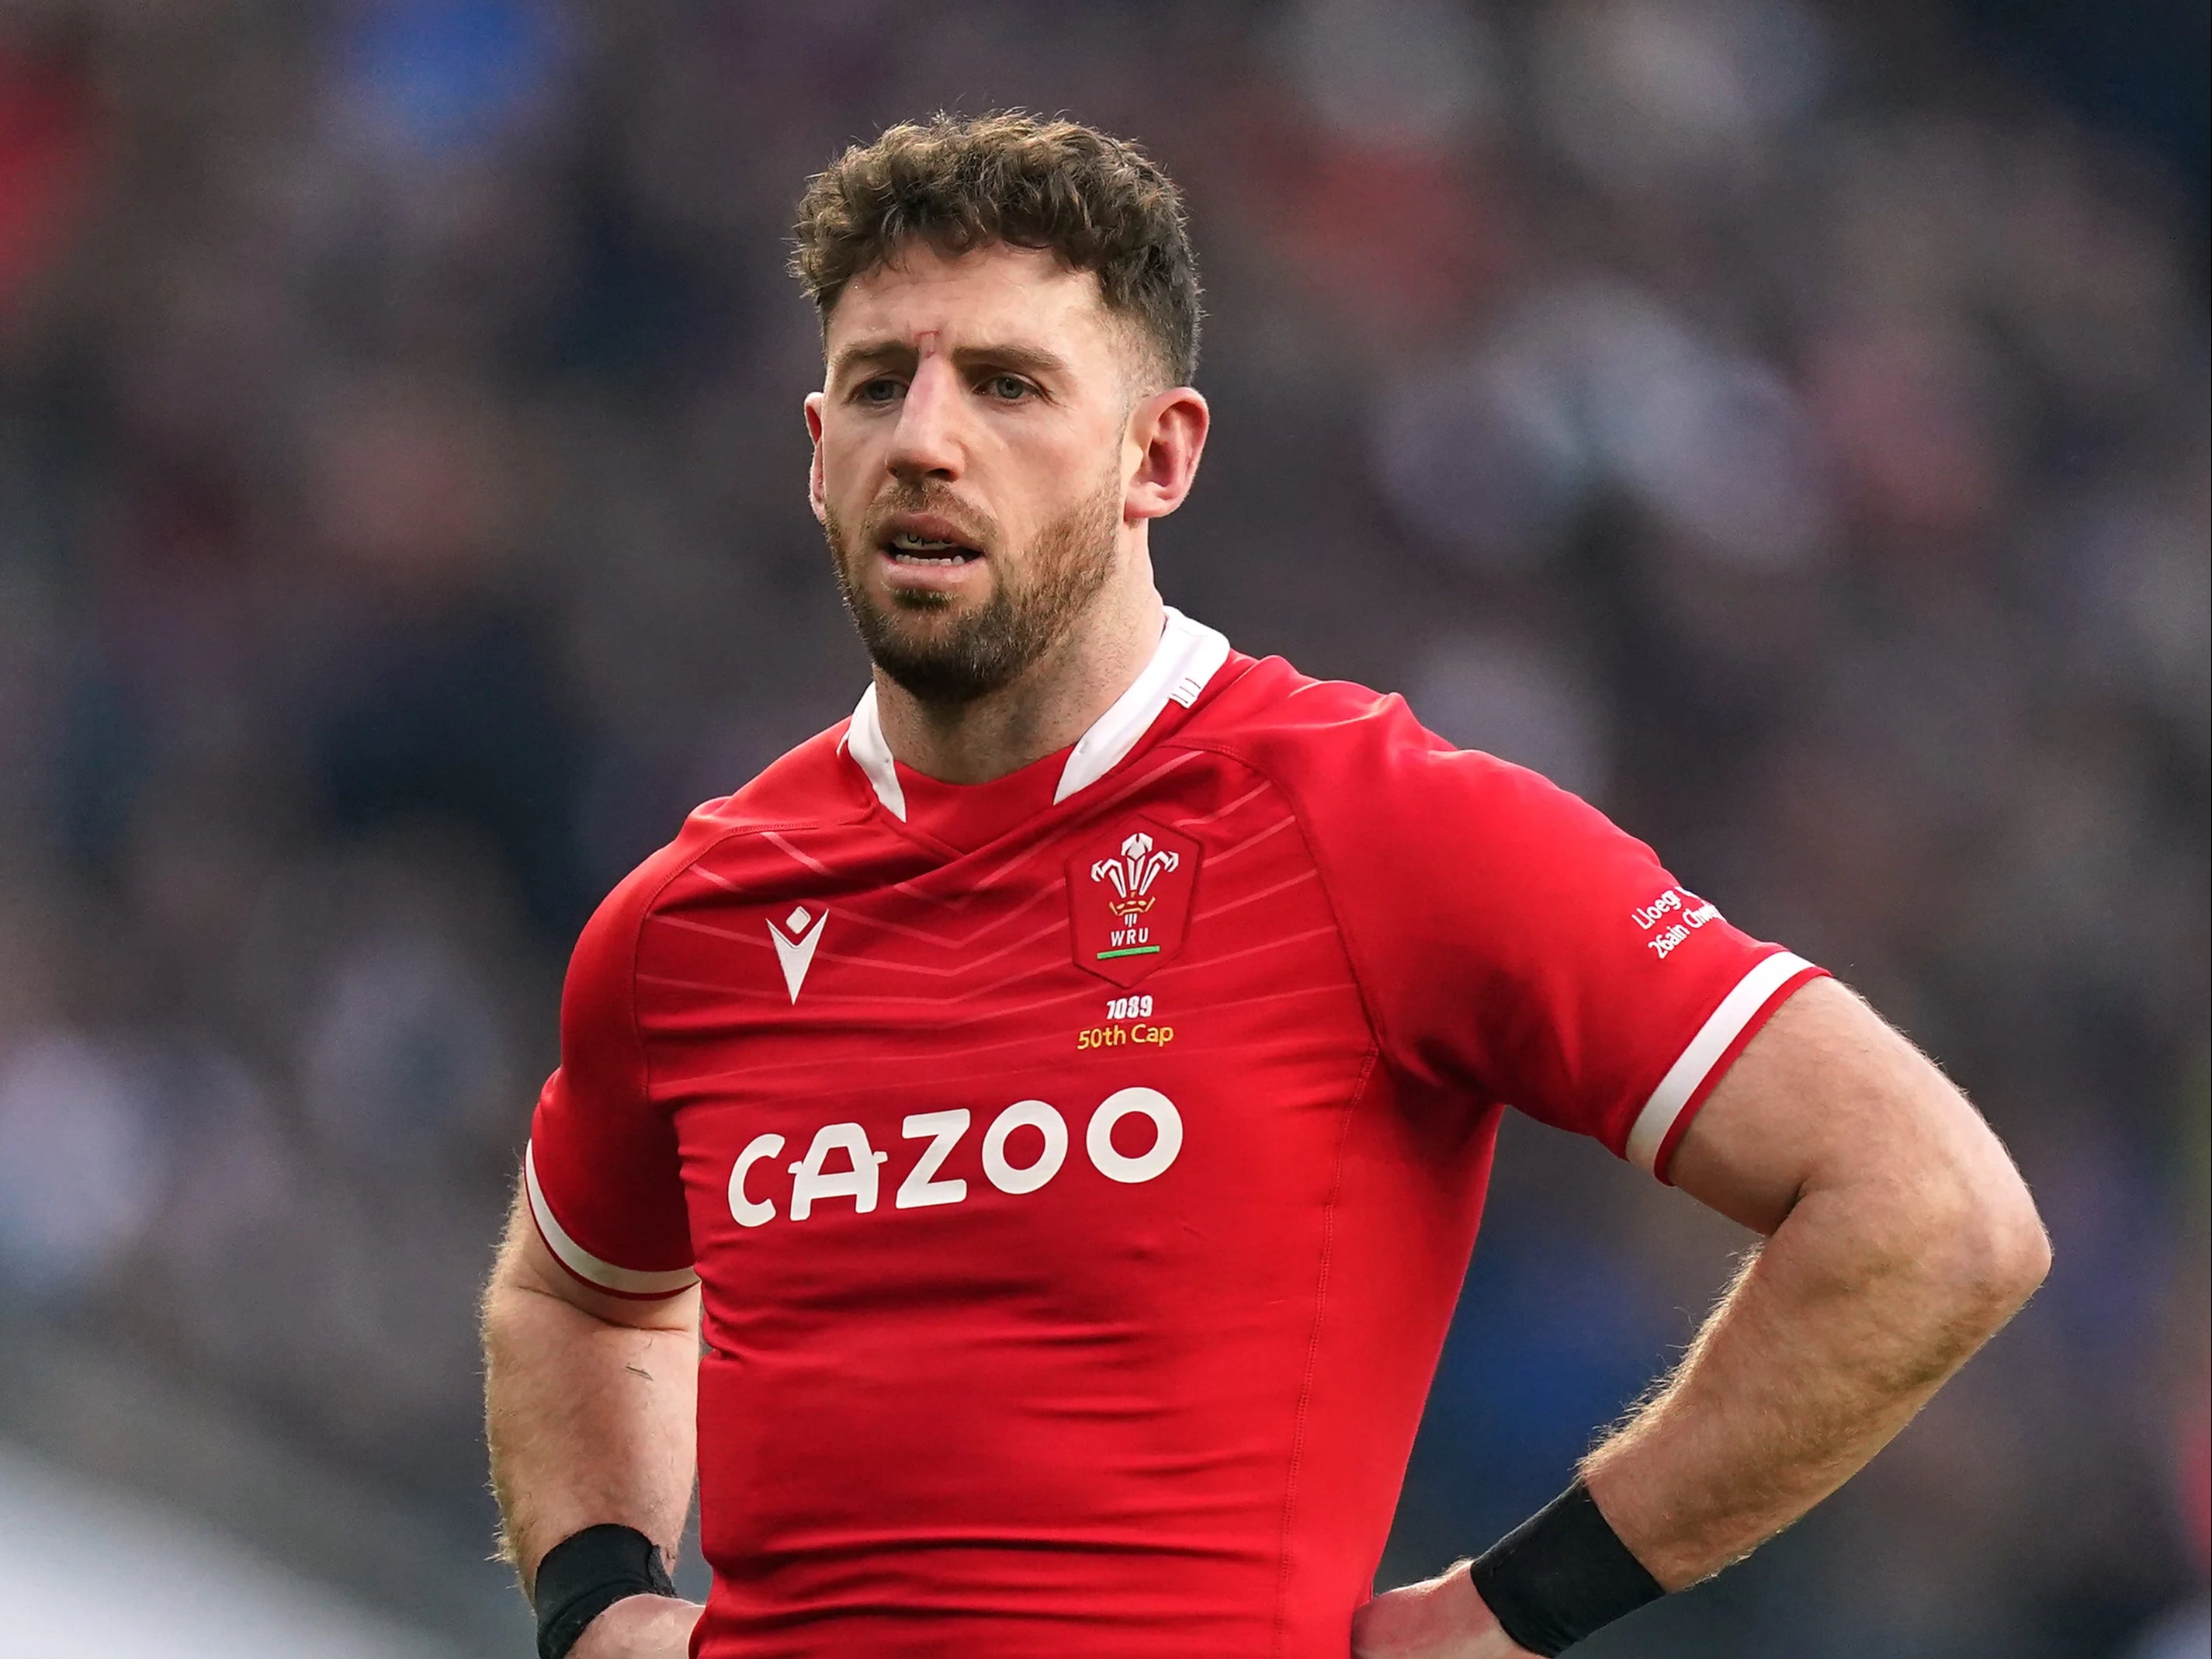 Alex Cuthbert has been called into the Wales team to face South Africa in the second Test